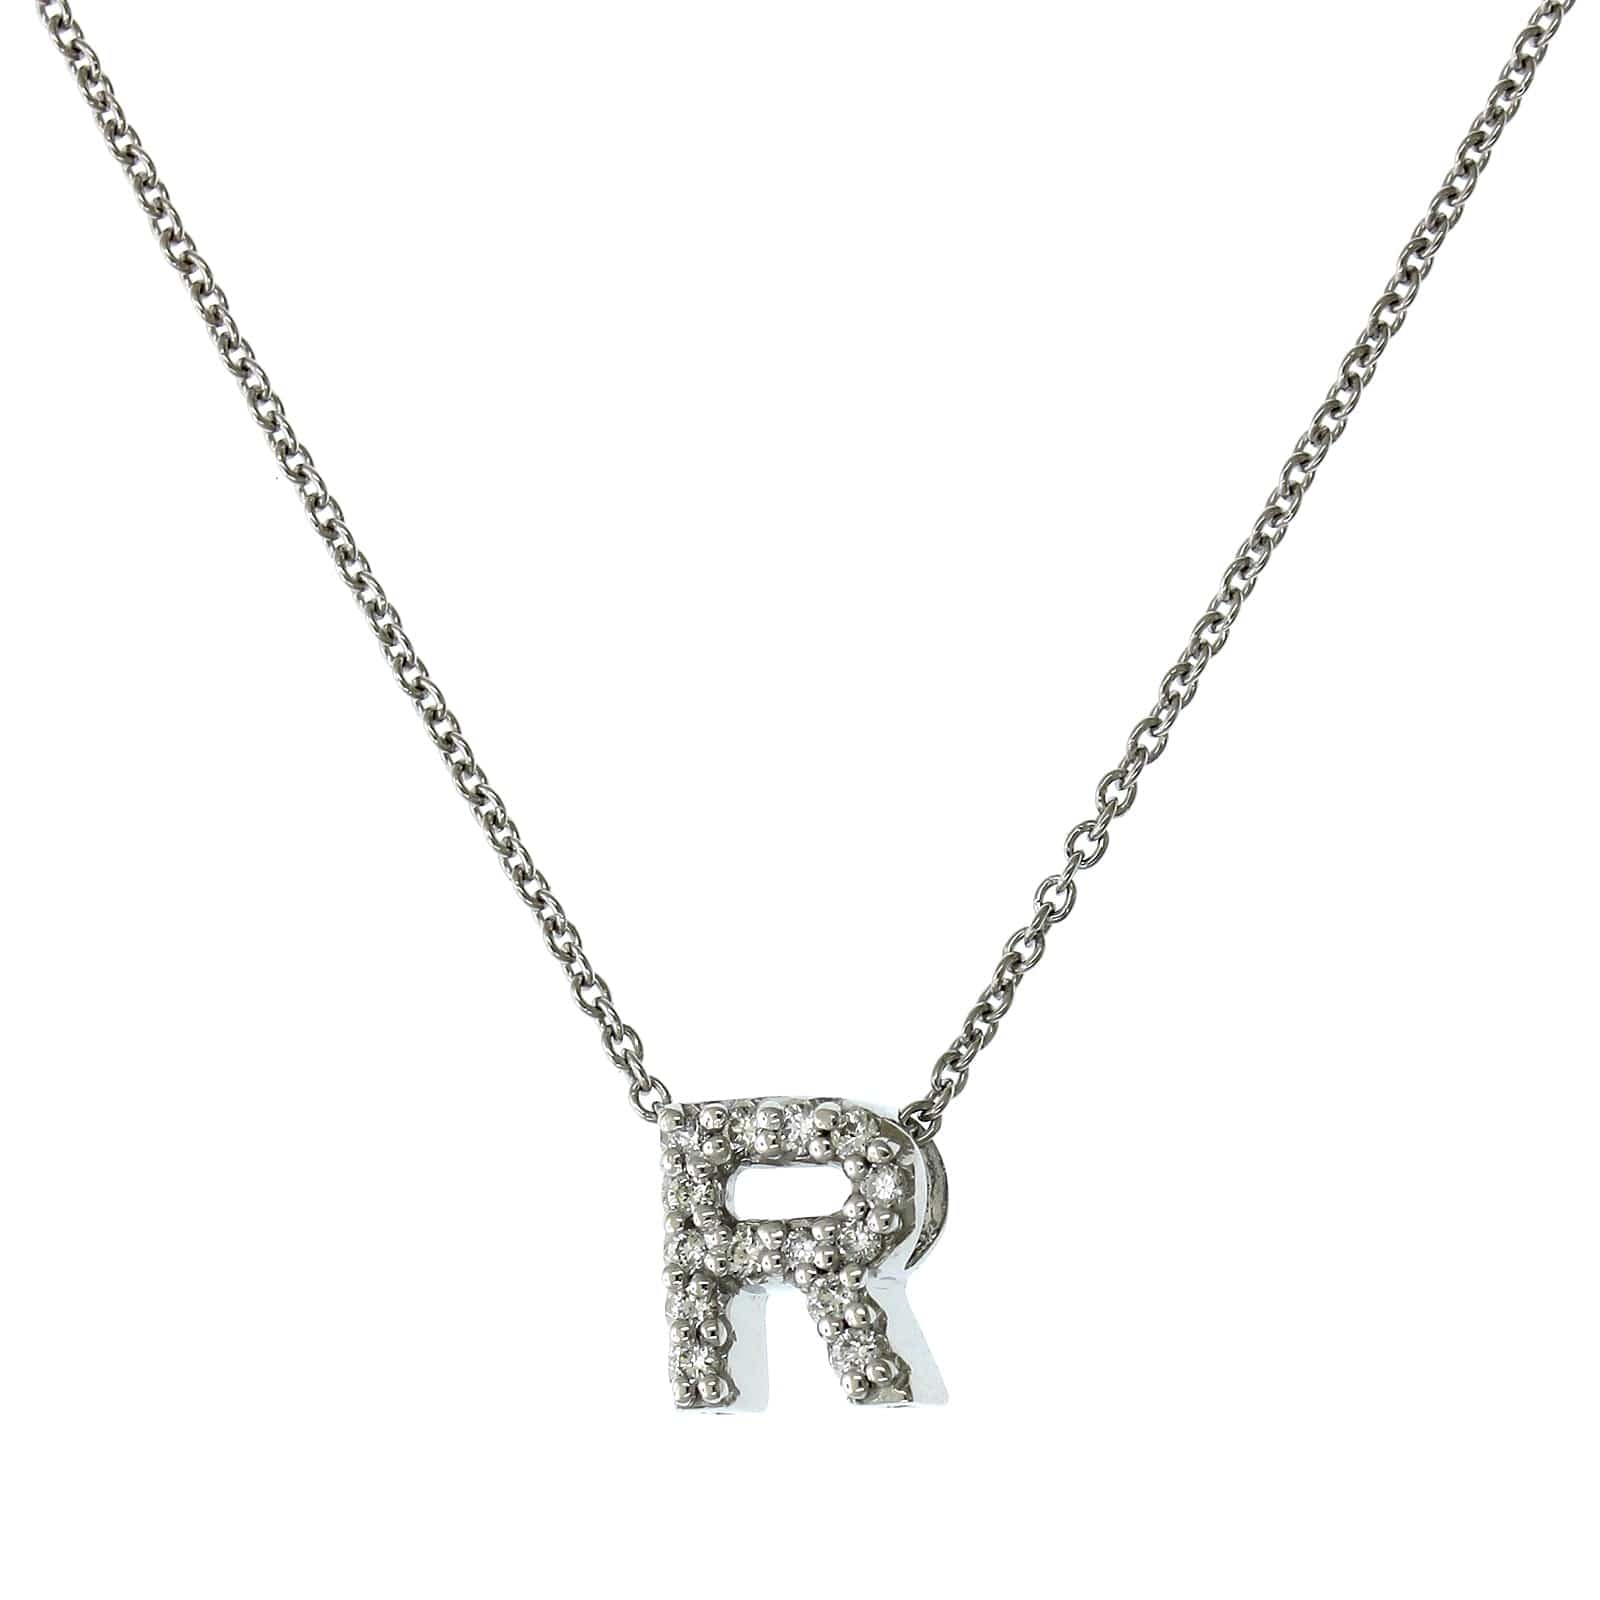 Roberto Coin 18K White Gold "R" Initial Diamond Necklace